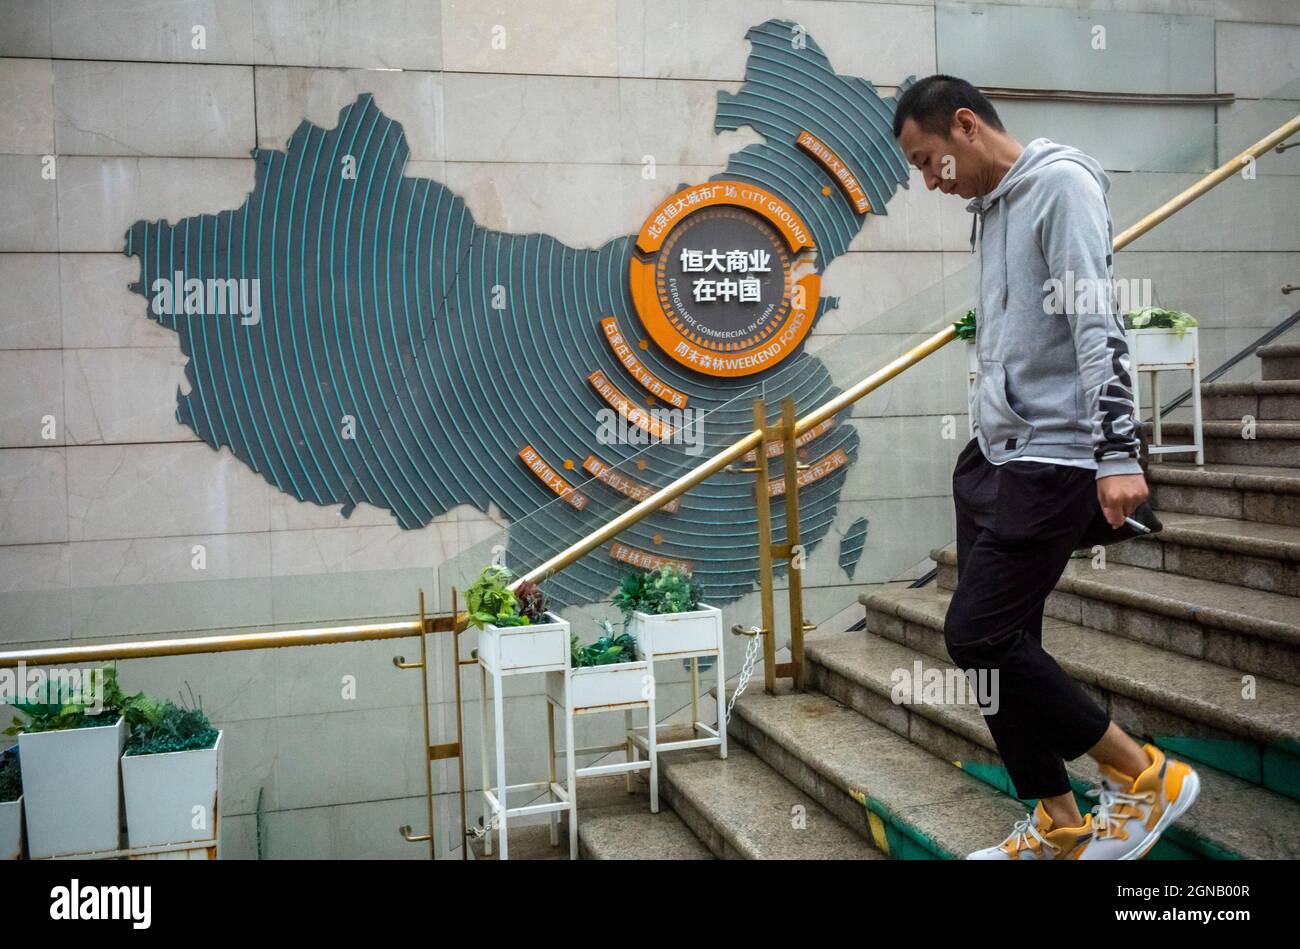 A man walks by a logo and map of China with Evergrande hubs at Evergrande city plaza in Beijing, China on 24/09/2021 Real Estate corporate financial troubles affect stock markets . Evergrande's shares were trading almost 10% lower in Hong Kong on Friday after jumping more than 17% the previous day. by Wiktor Dabkowski Stock Photo